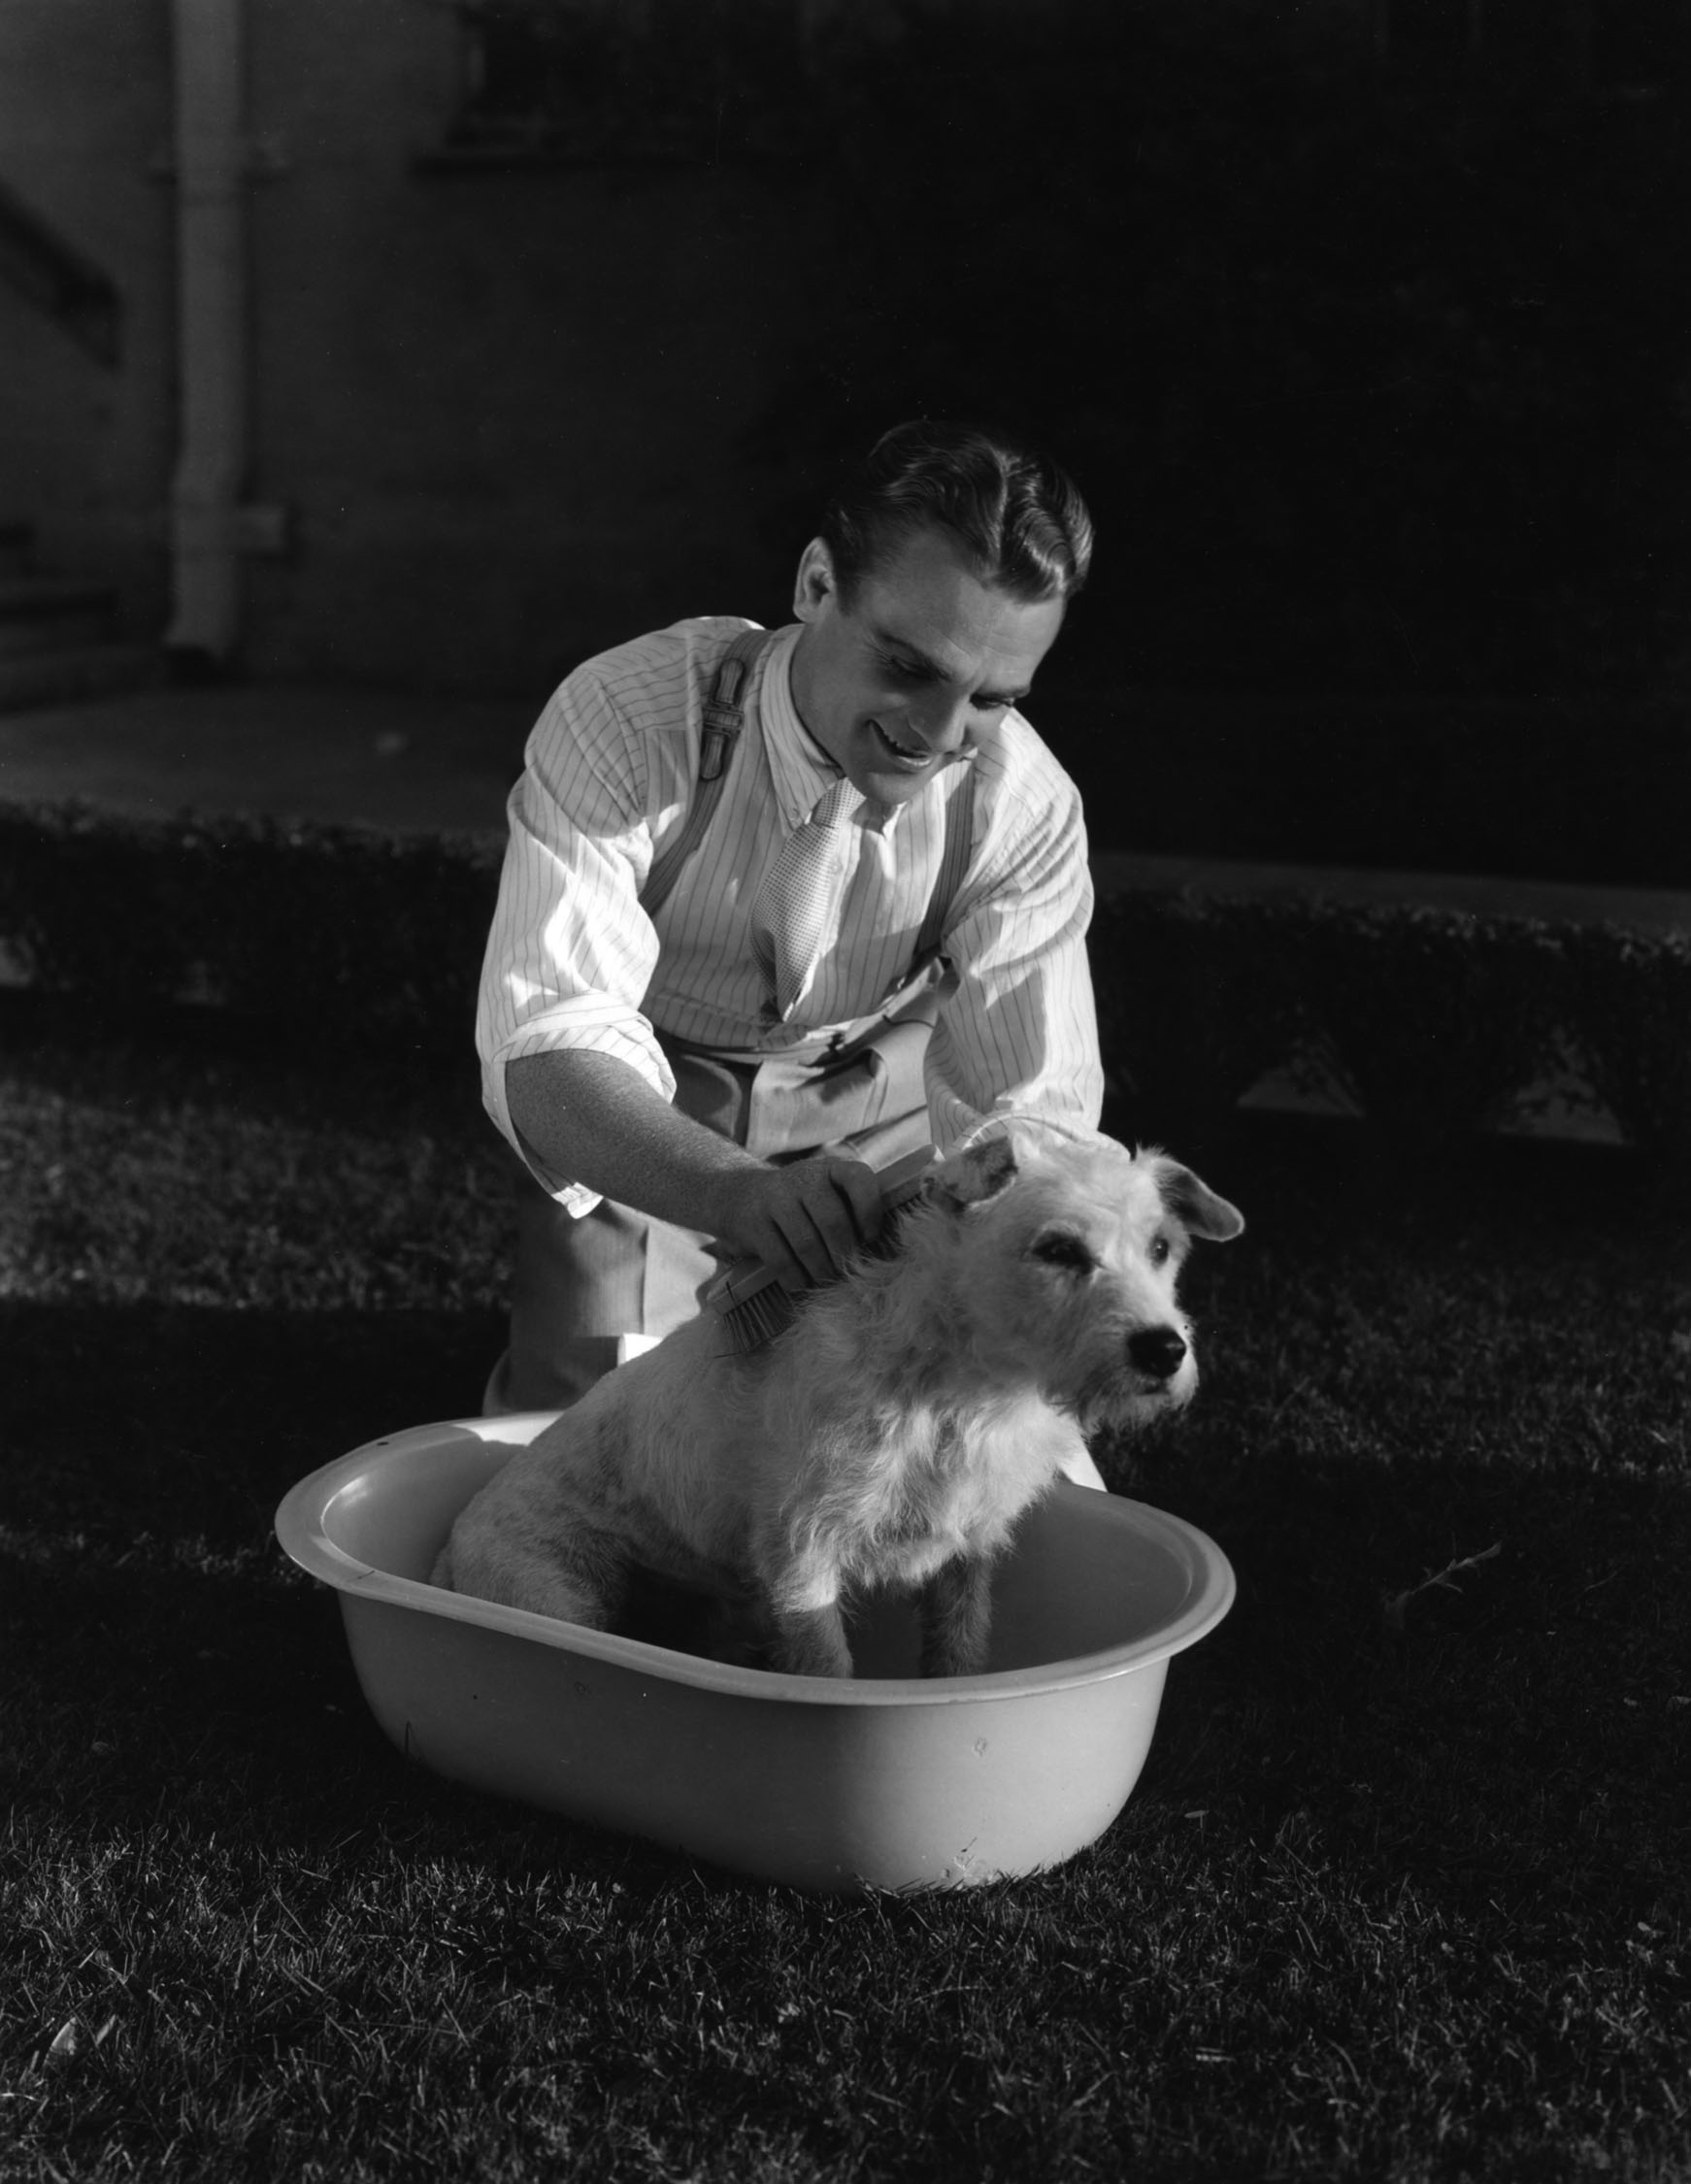 James Cagney washes a puppy, circa 1933.